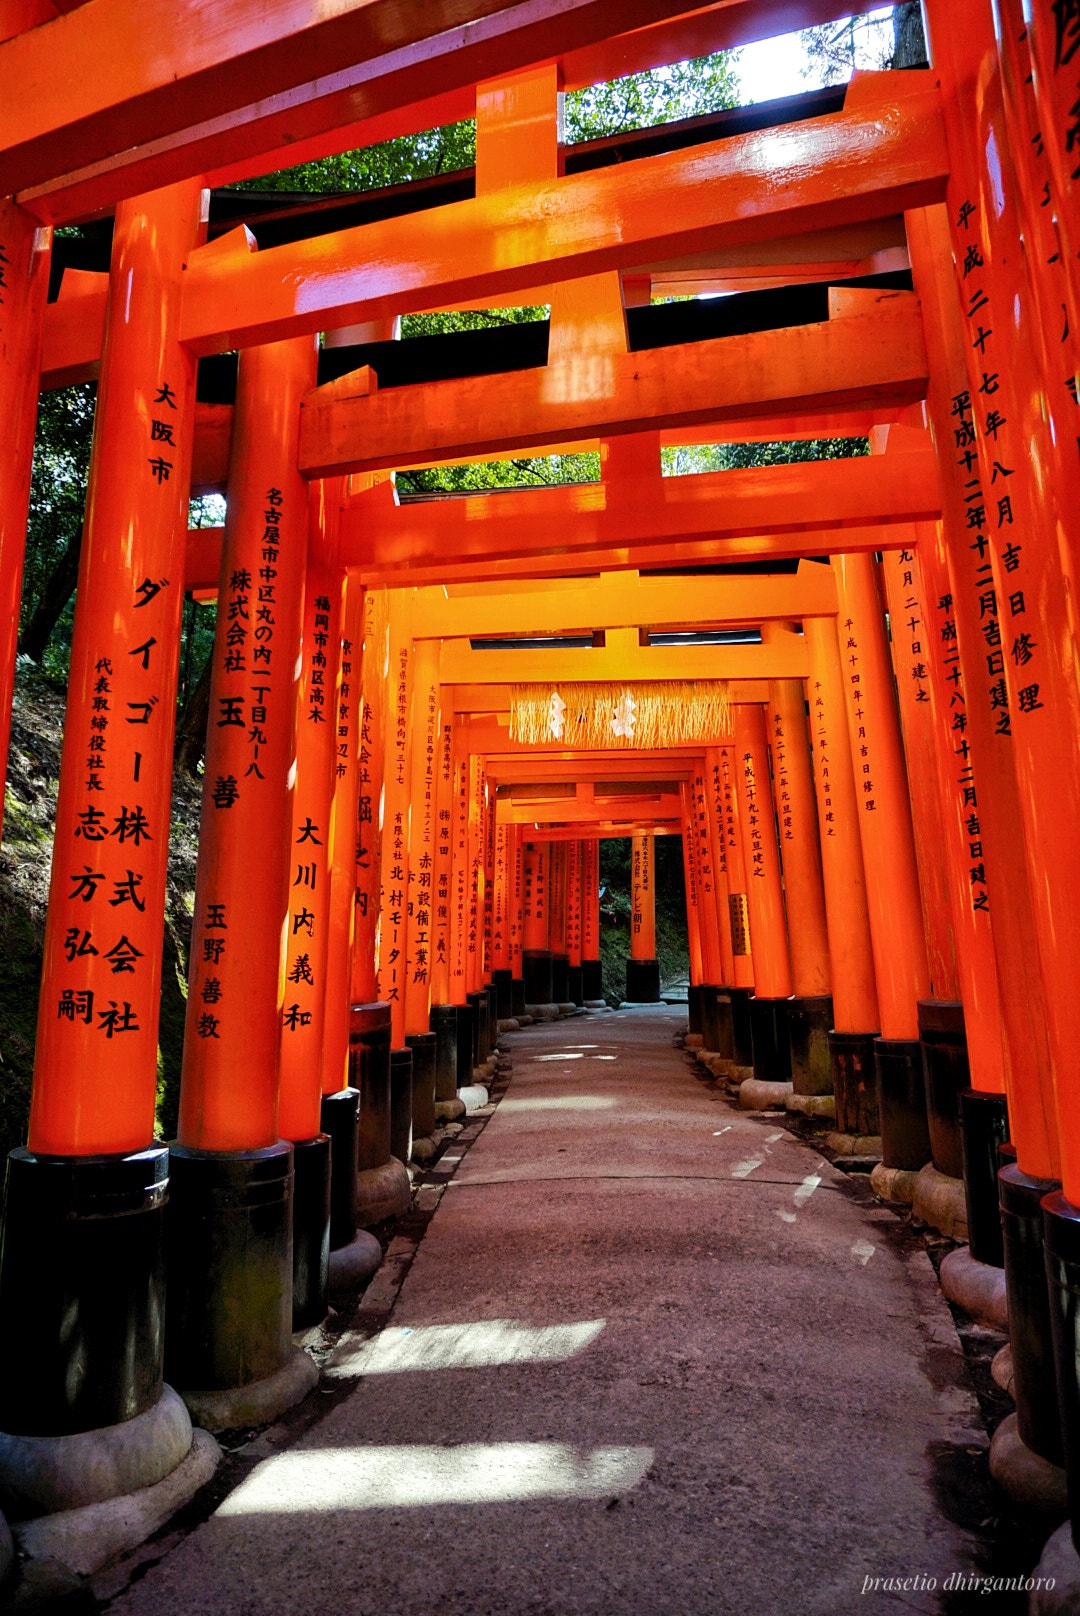 Sony a5100 sample photo. Thousands of torii gates photography